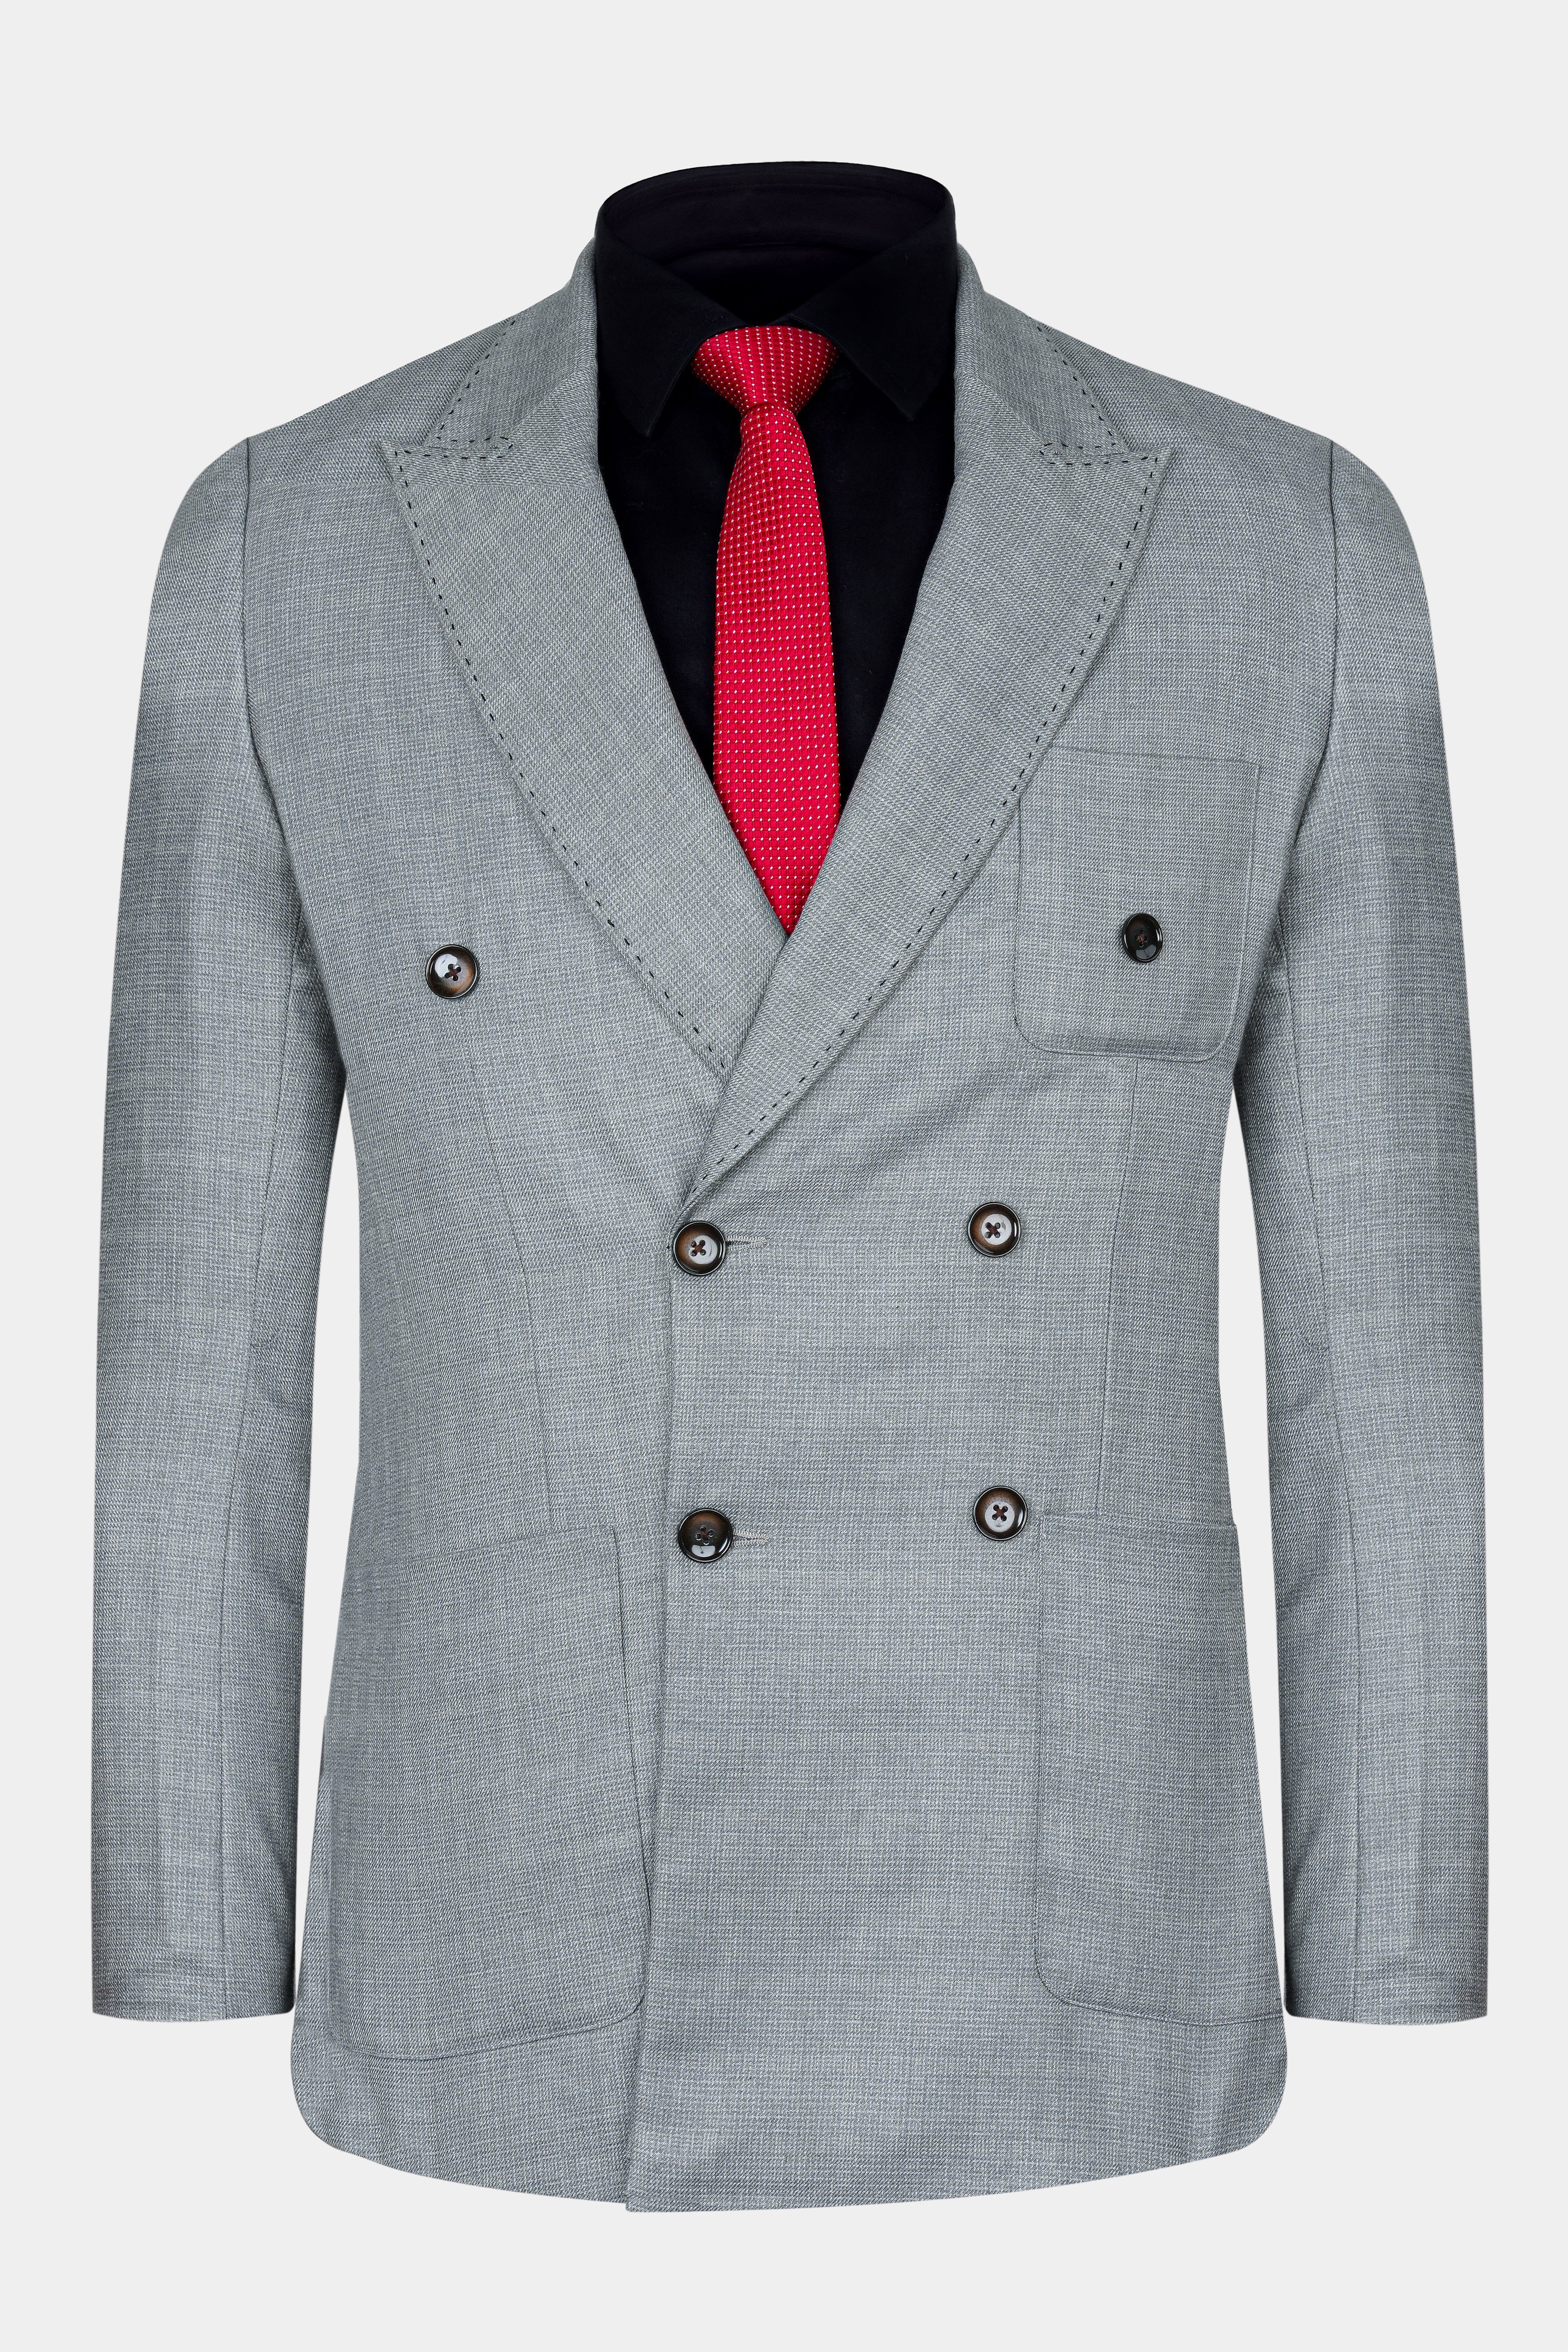 Oslo Gray Double Breasted Wool Rich Sports Blazer BL3009-DB-PP-36, BL3009-DB-PP-38, BL3009-DB-PP-40, BL3009-DB-PP-42, BL3009-DB-PP-44, BL3009-DB-PP-46, BL3009-DB-PP-48, BL3009-DB-PP-50, BL3009-DB-PP-52, BL3009-DB-PP-54, BL3009-DB-PP-56, BL3009-DB-PP-58, BL3009-DB-PP-60